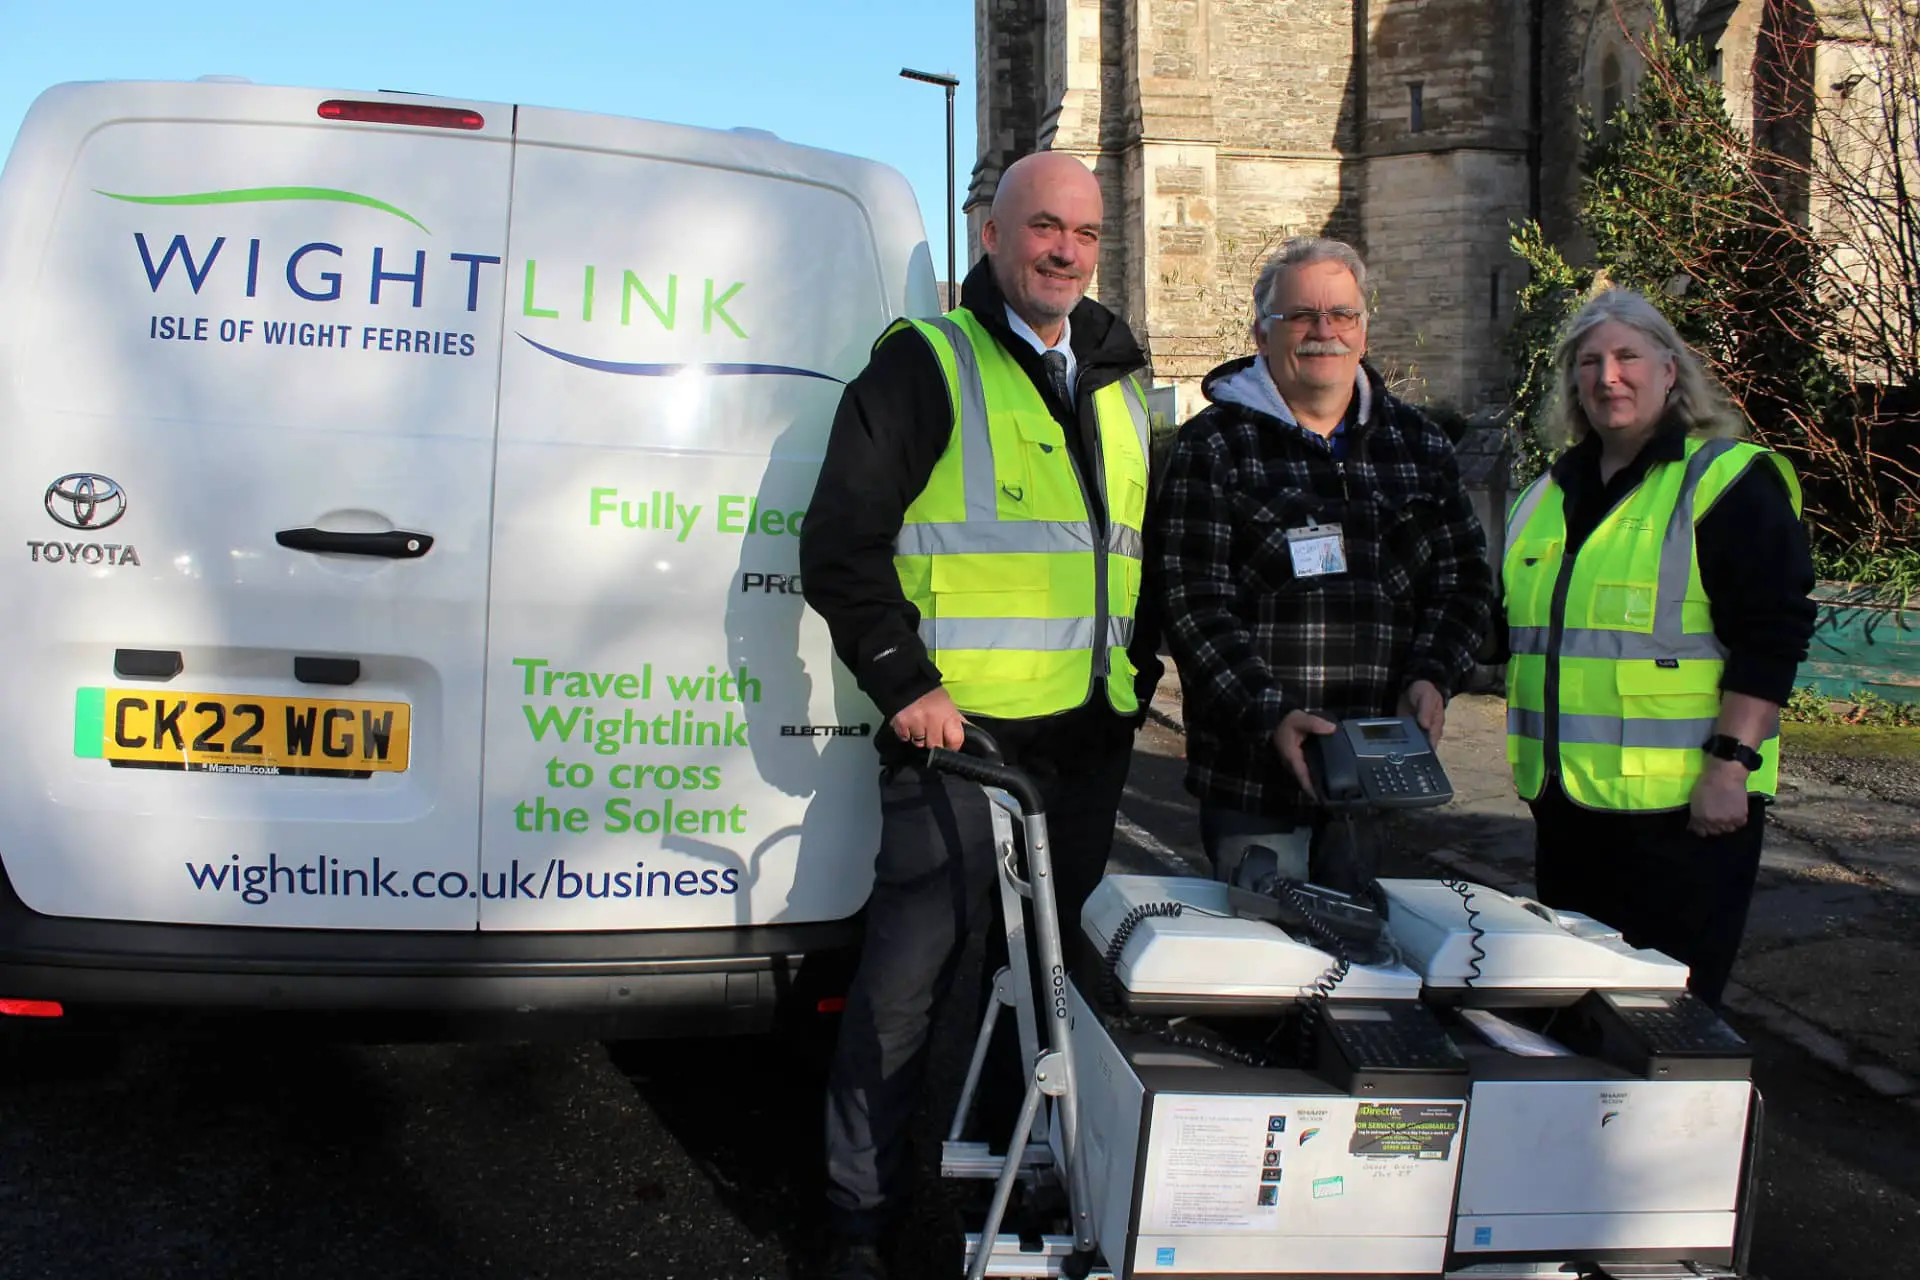 Printers and phones being donated to the Aspire charity